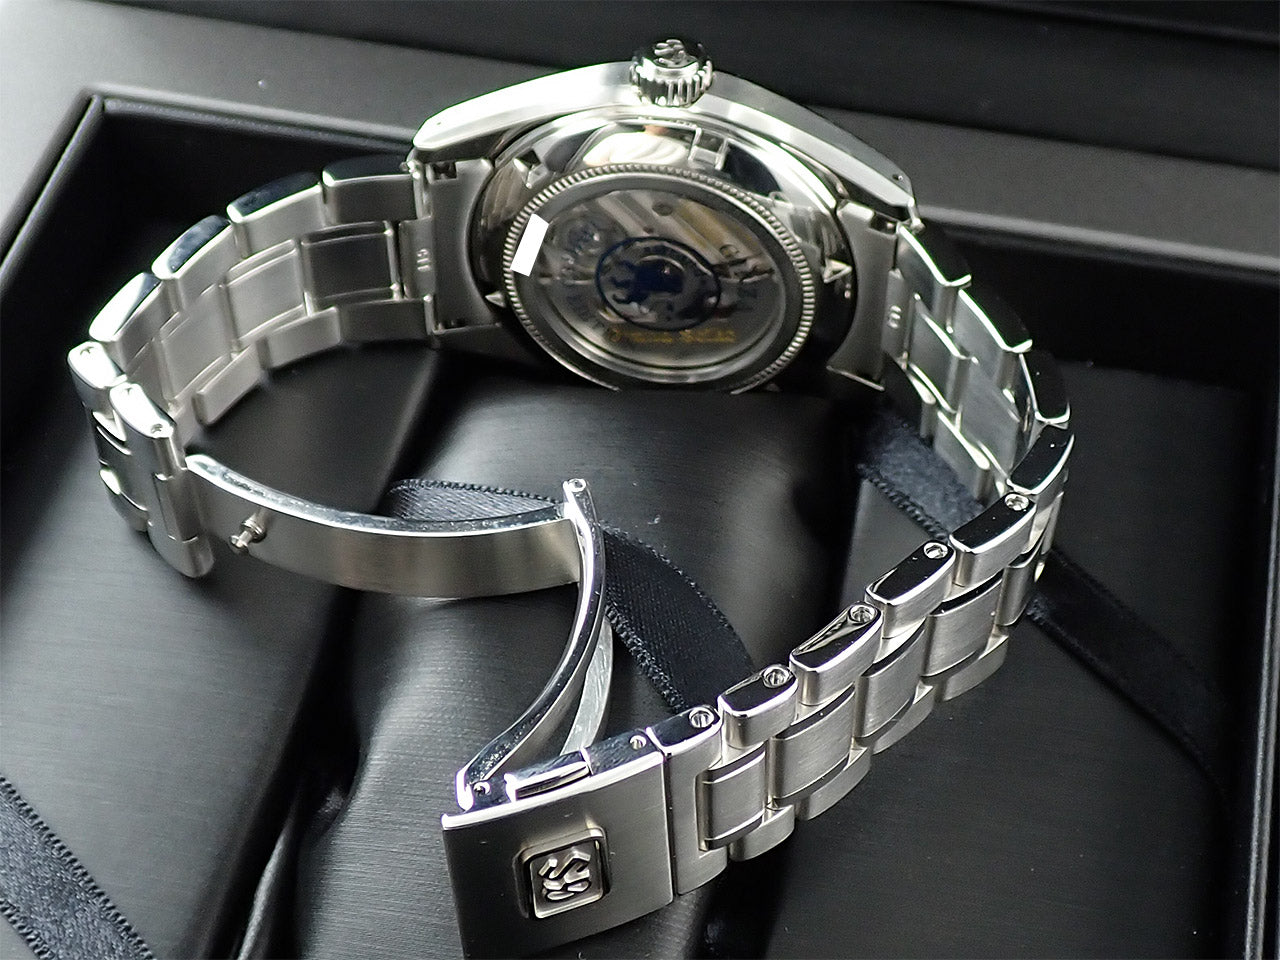 Grand Seiko Heritage Collection Mechanical Hi-Beat 36000 Ginza Limited Edition 2023 &lt;Warranty, Box, etc.&gt;